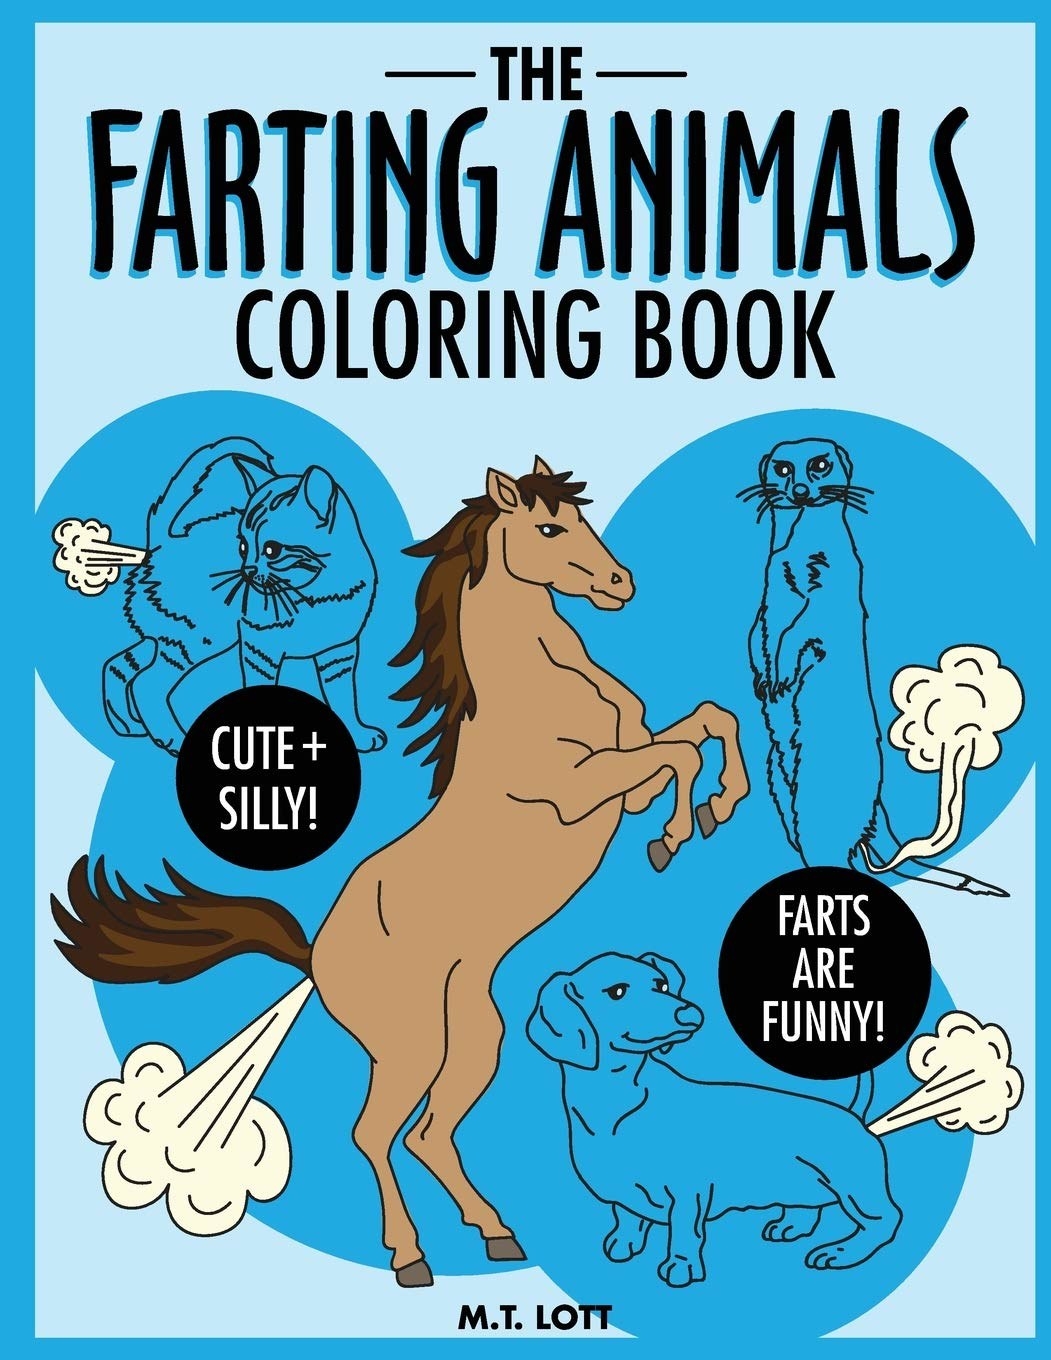 The cover of the book with farting animals on it